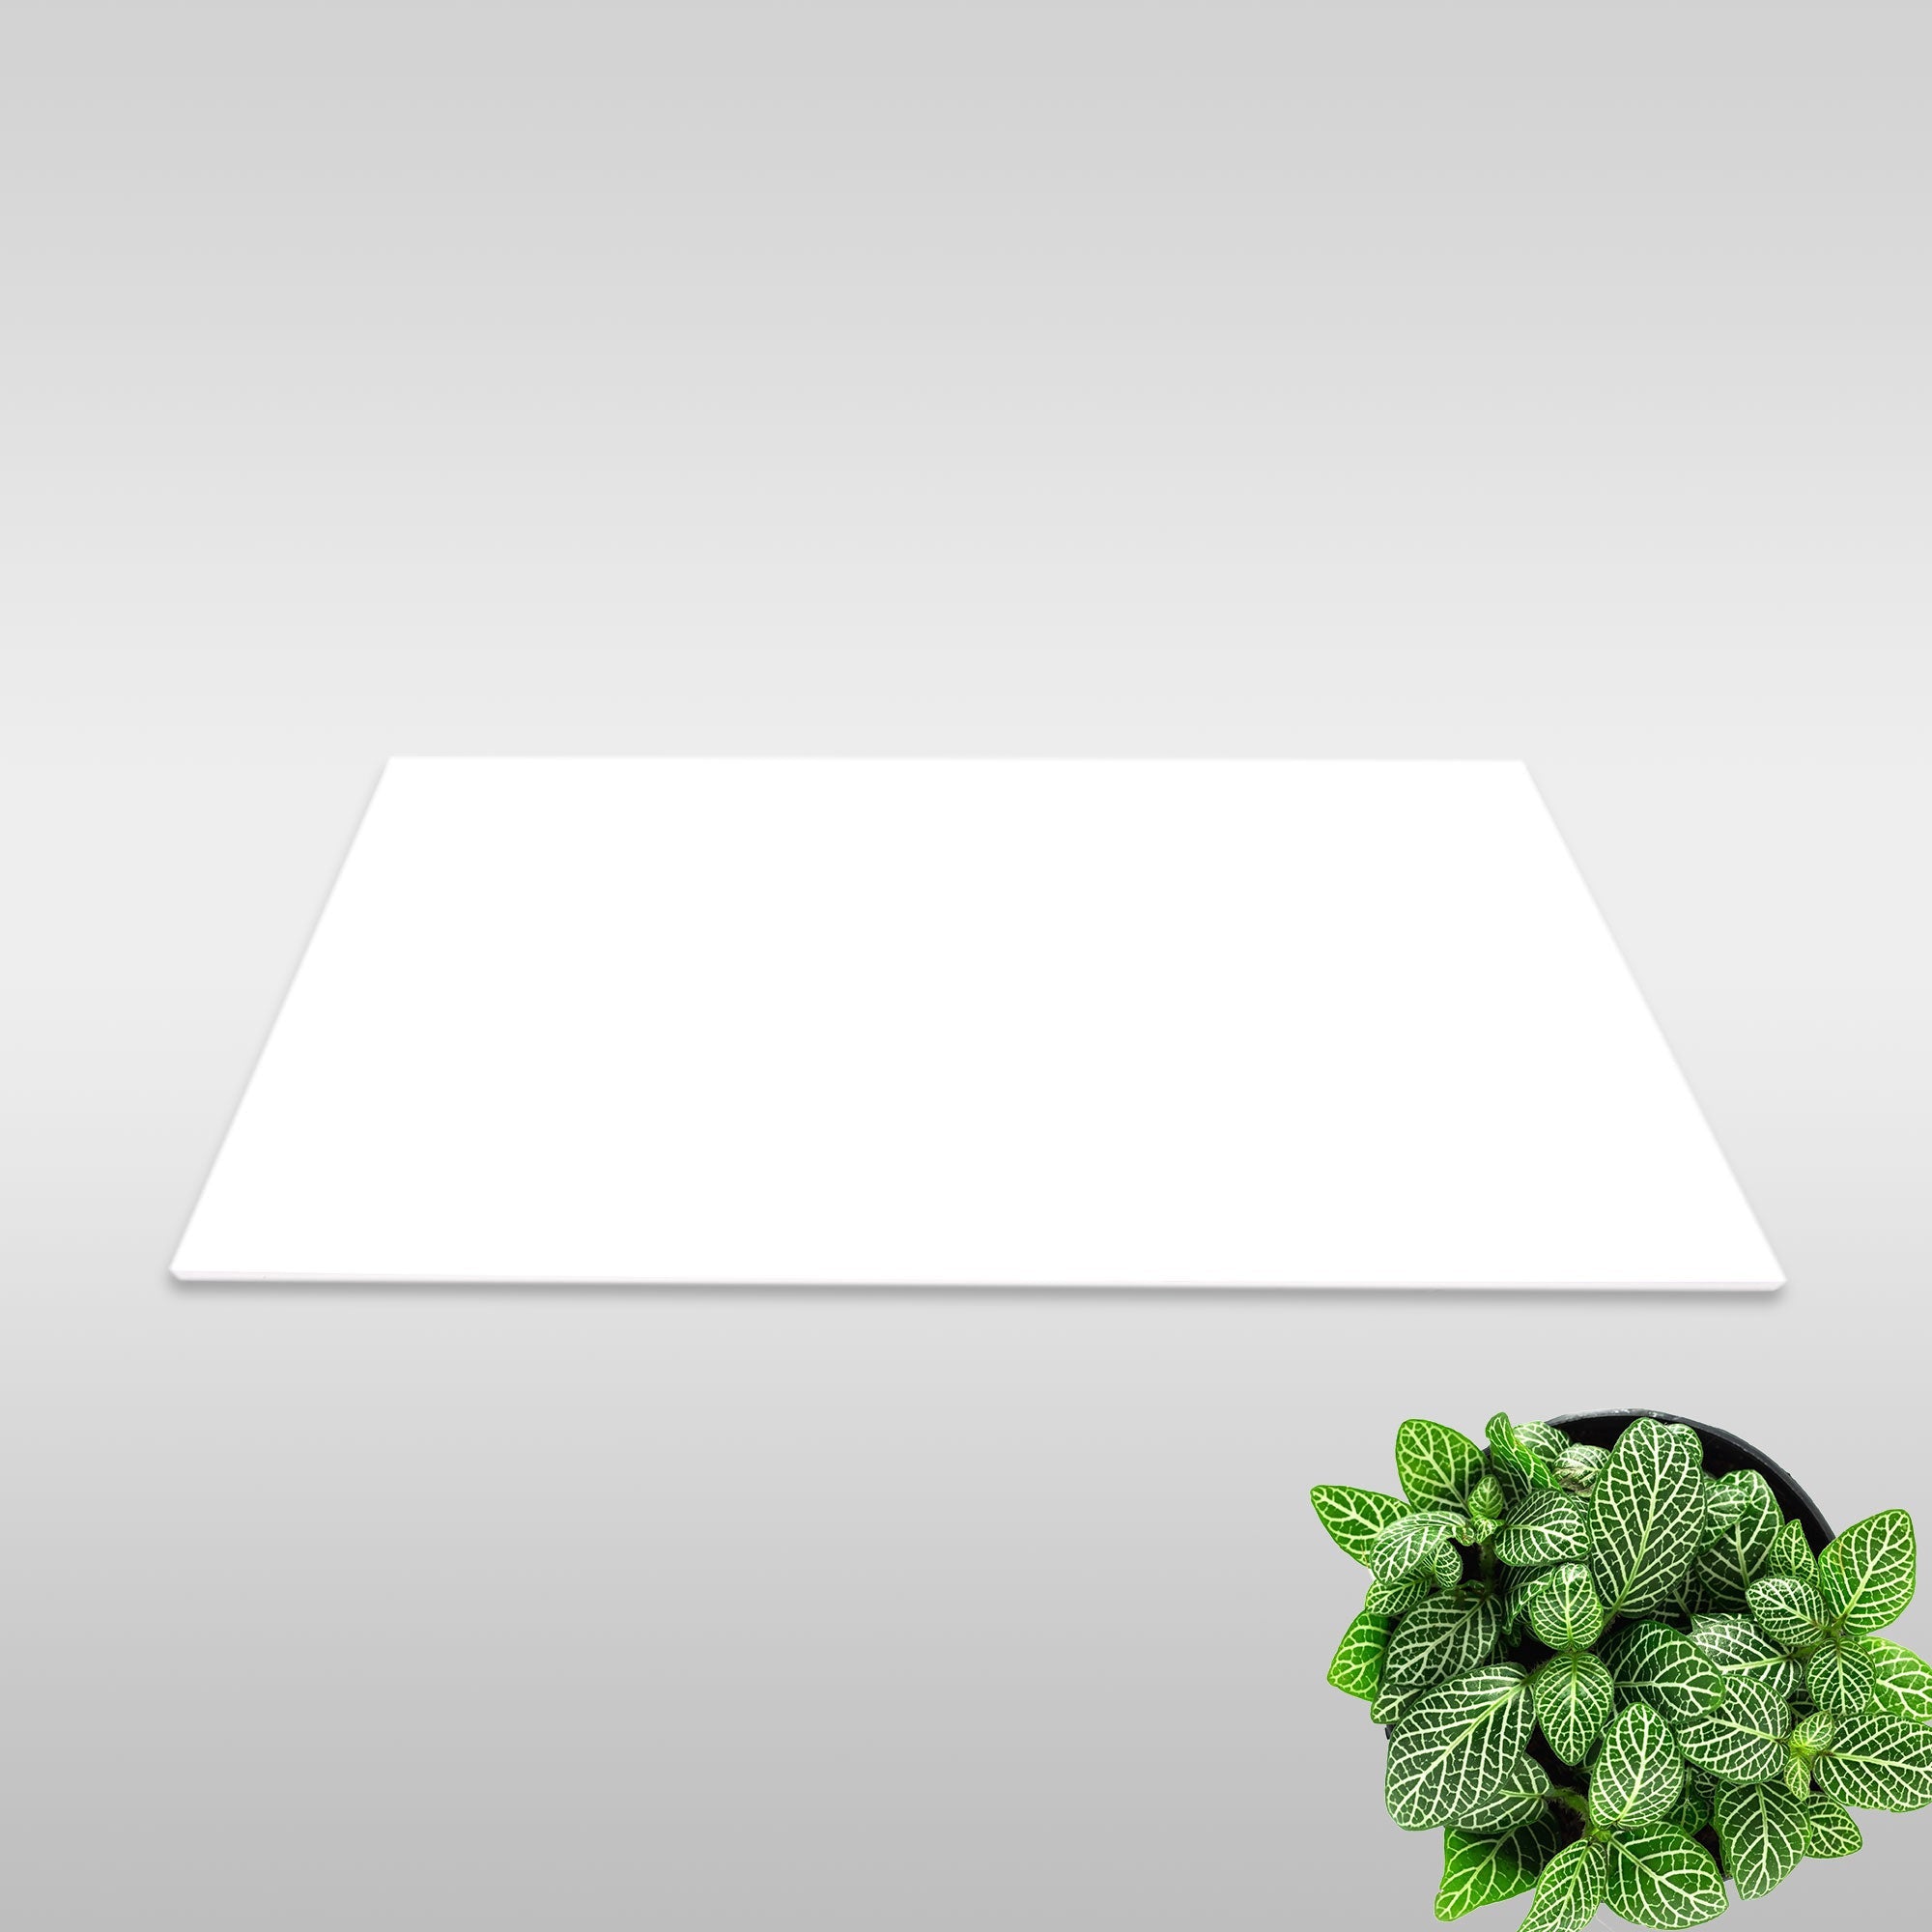 Deluxe Super White Gloss Rectified Tile 30x60cm